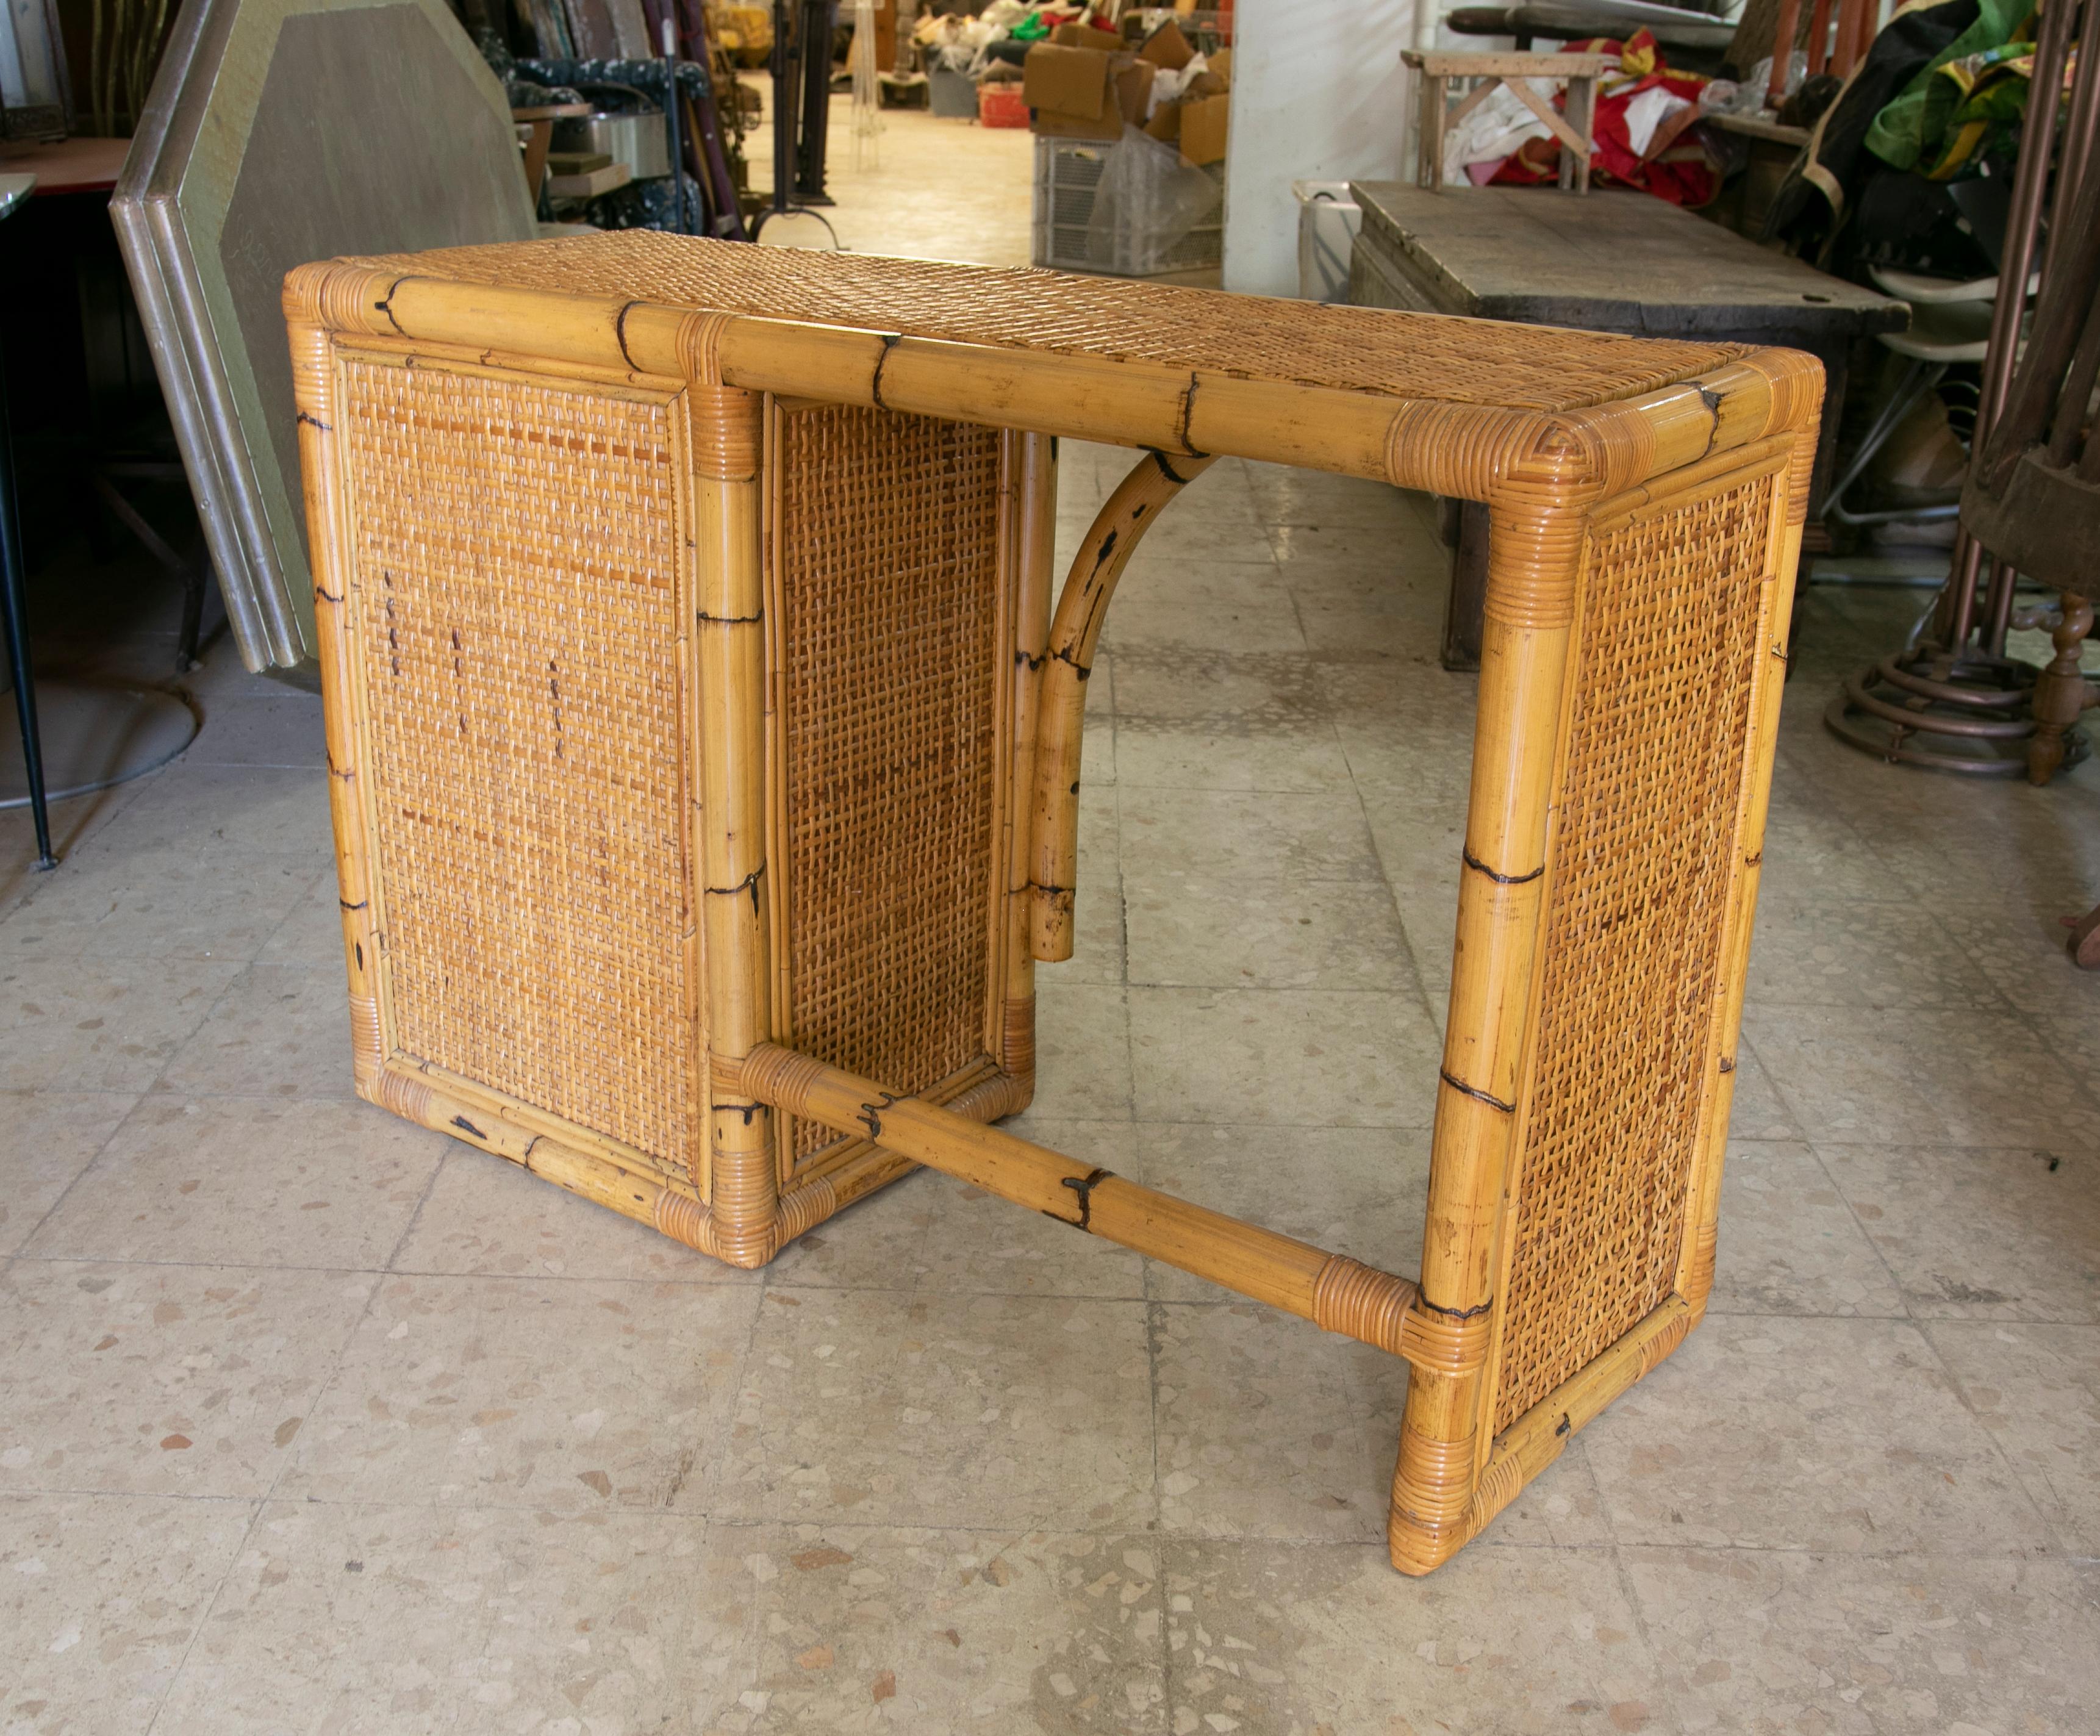 1970s Spanish Desk Made of Bamboo and Wicker with Four Drawers For Sale 2